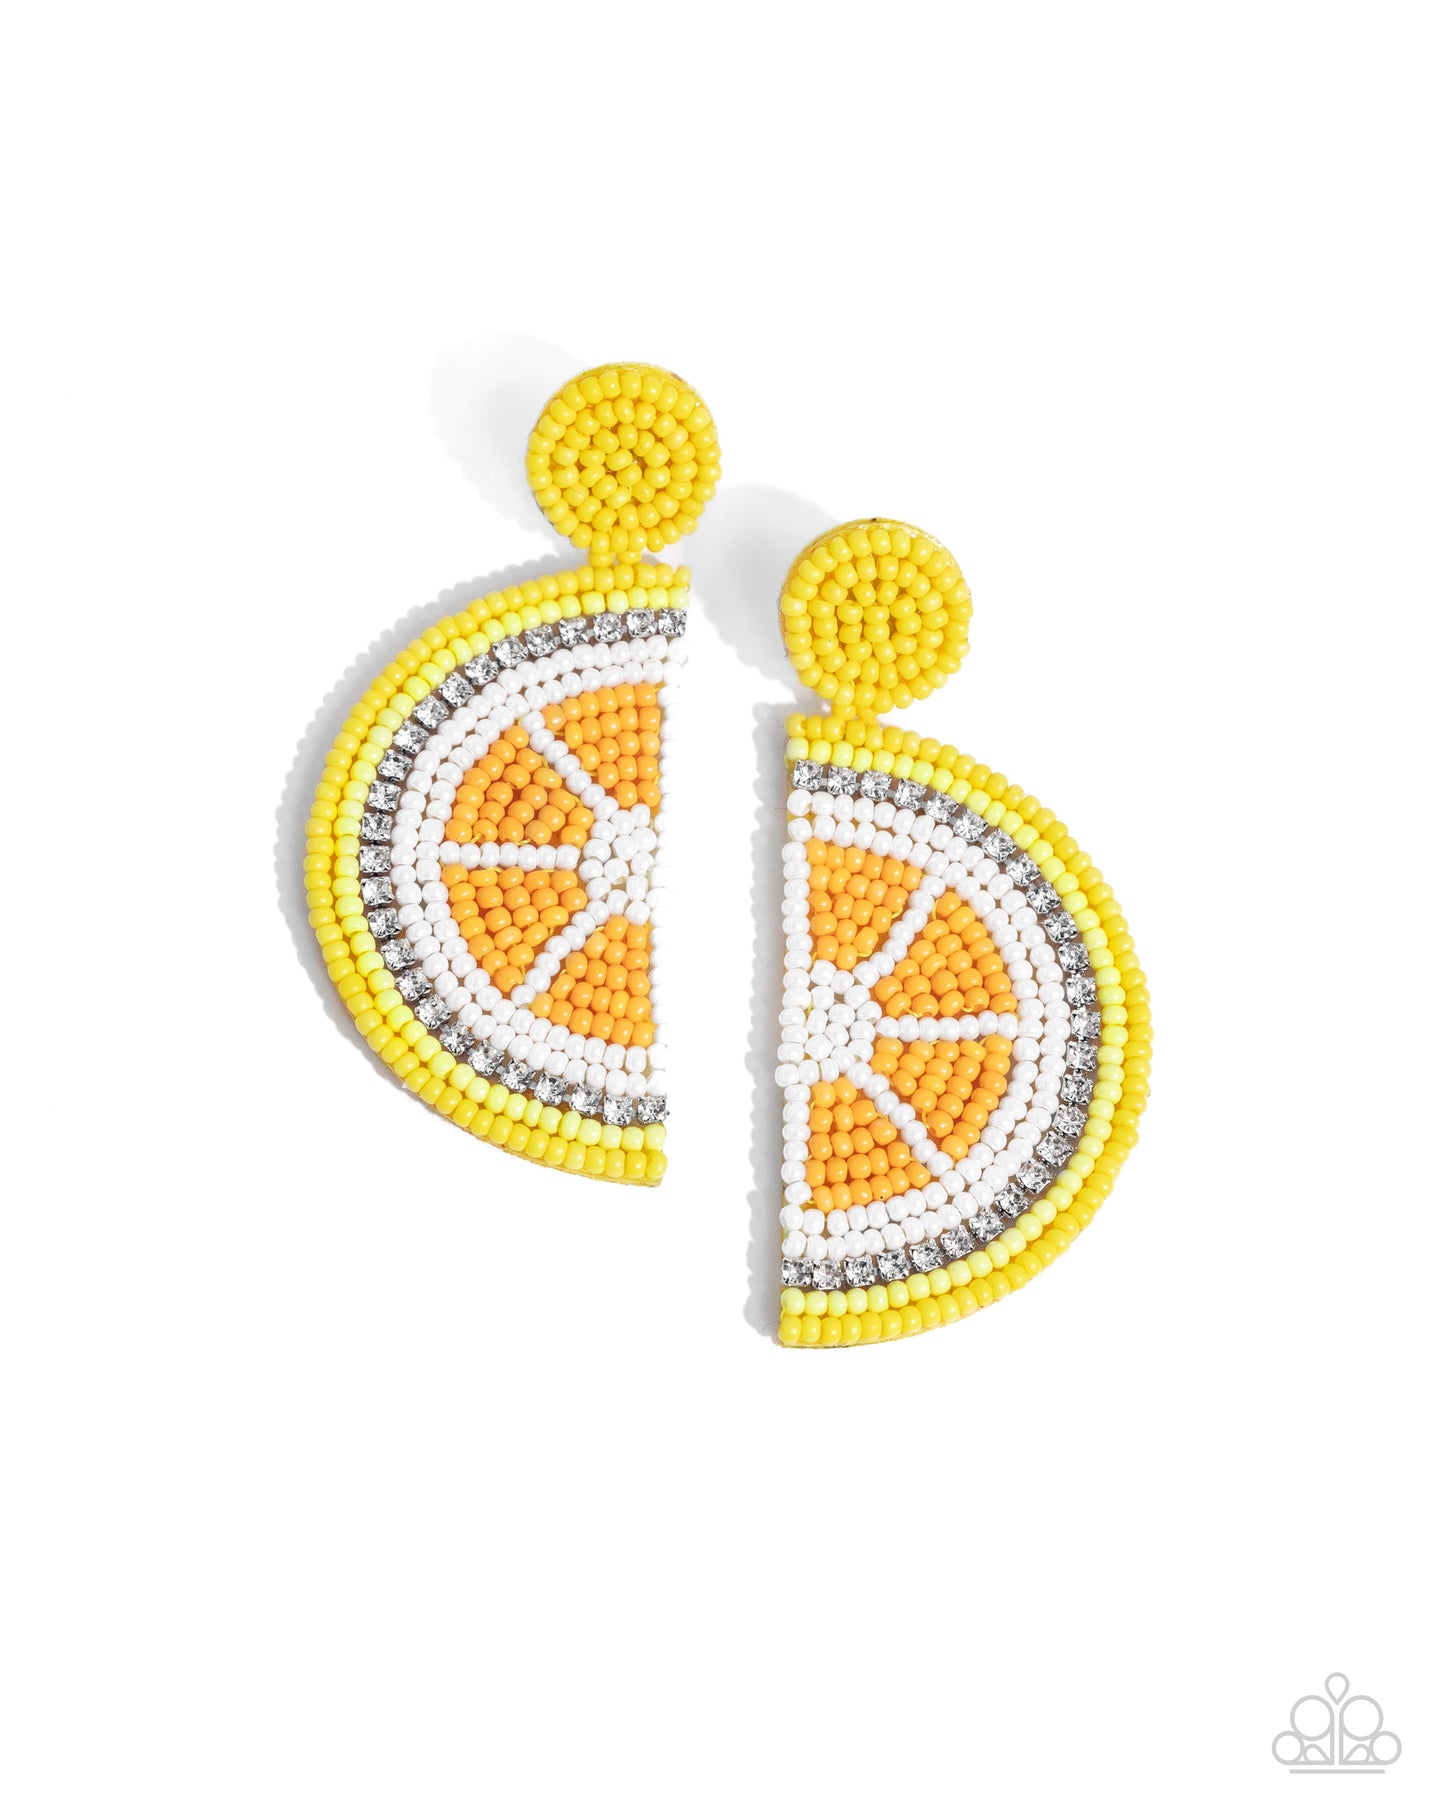 Paparazzi Accessories - Lemon Leader - Yellow Earrings a yellow seed bead post gives way to a lemon-like pendant formed from various yellow and white seed beads. A row of glistening white rhinestones also forms along the rind of the lemon for a touch of sparkle. Earring attaches to a standard post fitting. Sold as one pair of post earrings.